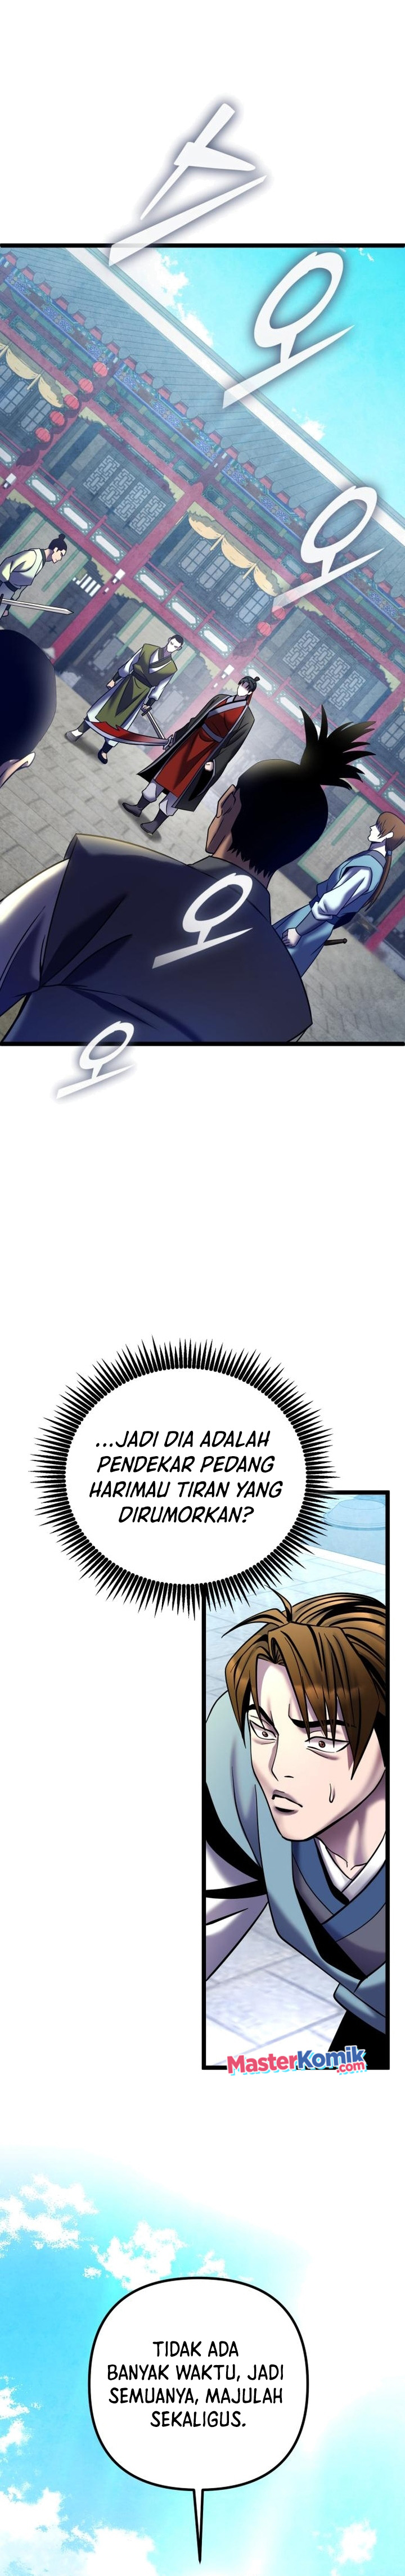 Revenge Of Young Master Peng Chapter 80